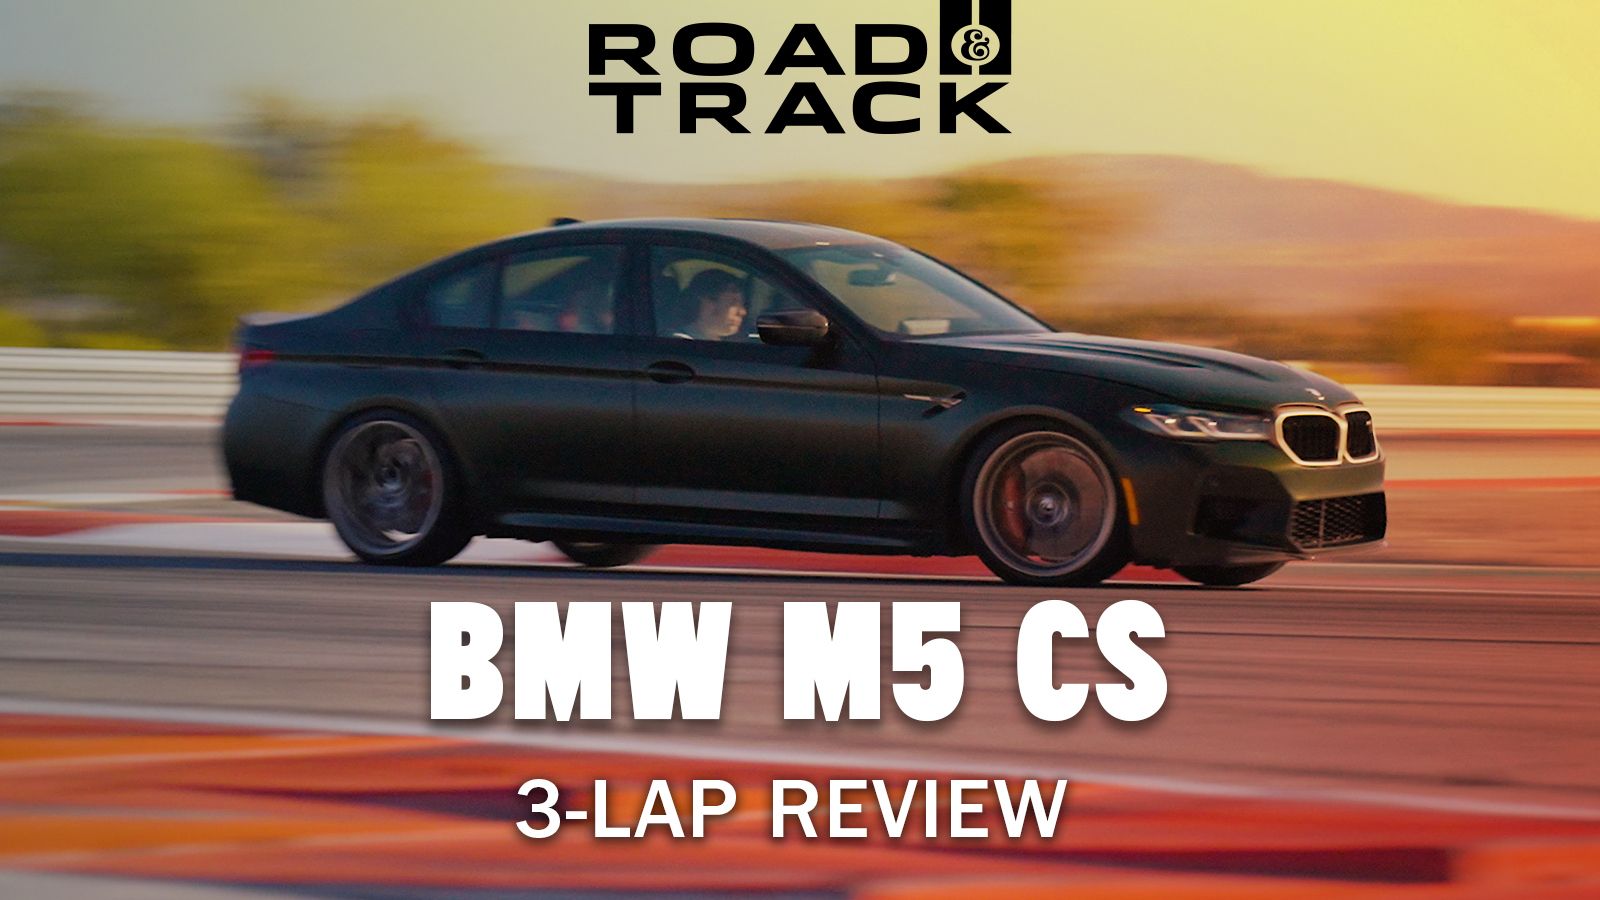 2022 Bmw M5 Cs On-Track Video Review: The M5 At Its Best